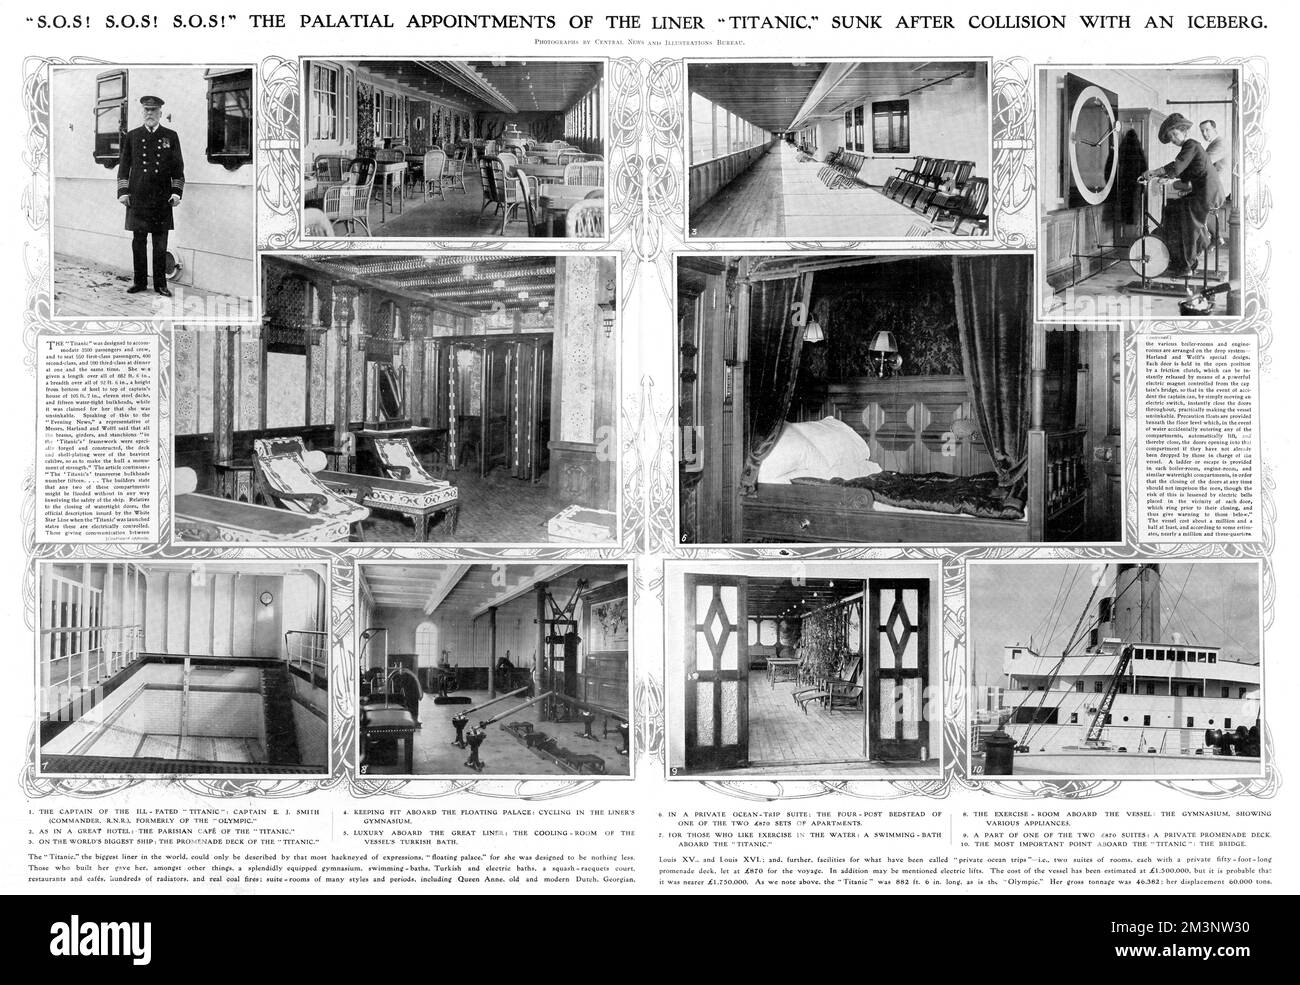 A double page spread from the Illustrated London News following the sinking of the Titanic, showing some of the most well appointed interiors of the luxurious ship including a four-poster bed in the 870 first class apartments, the swimming pool, gymnasium, promenade deck (including a private one accompanying the 870 suite), cooling room of the Turkish bath and the Parisian cafe.  Picture 1 shows Captain E. J. Smith, who went down with the ship.     Date: 1912 Stock Photo